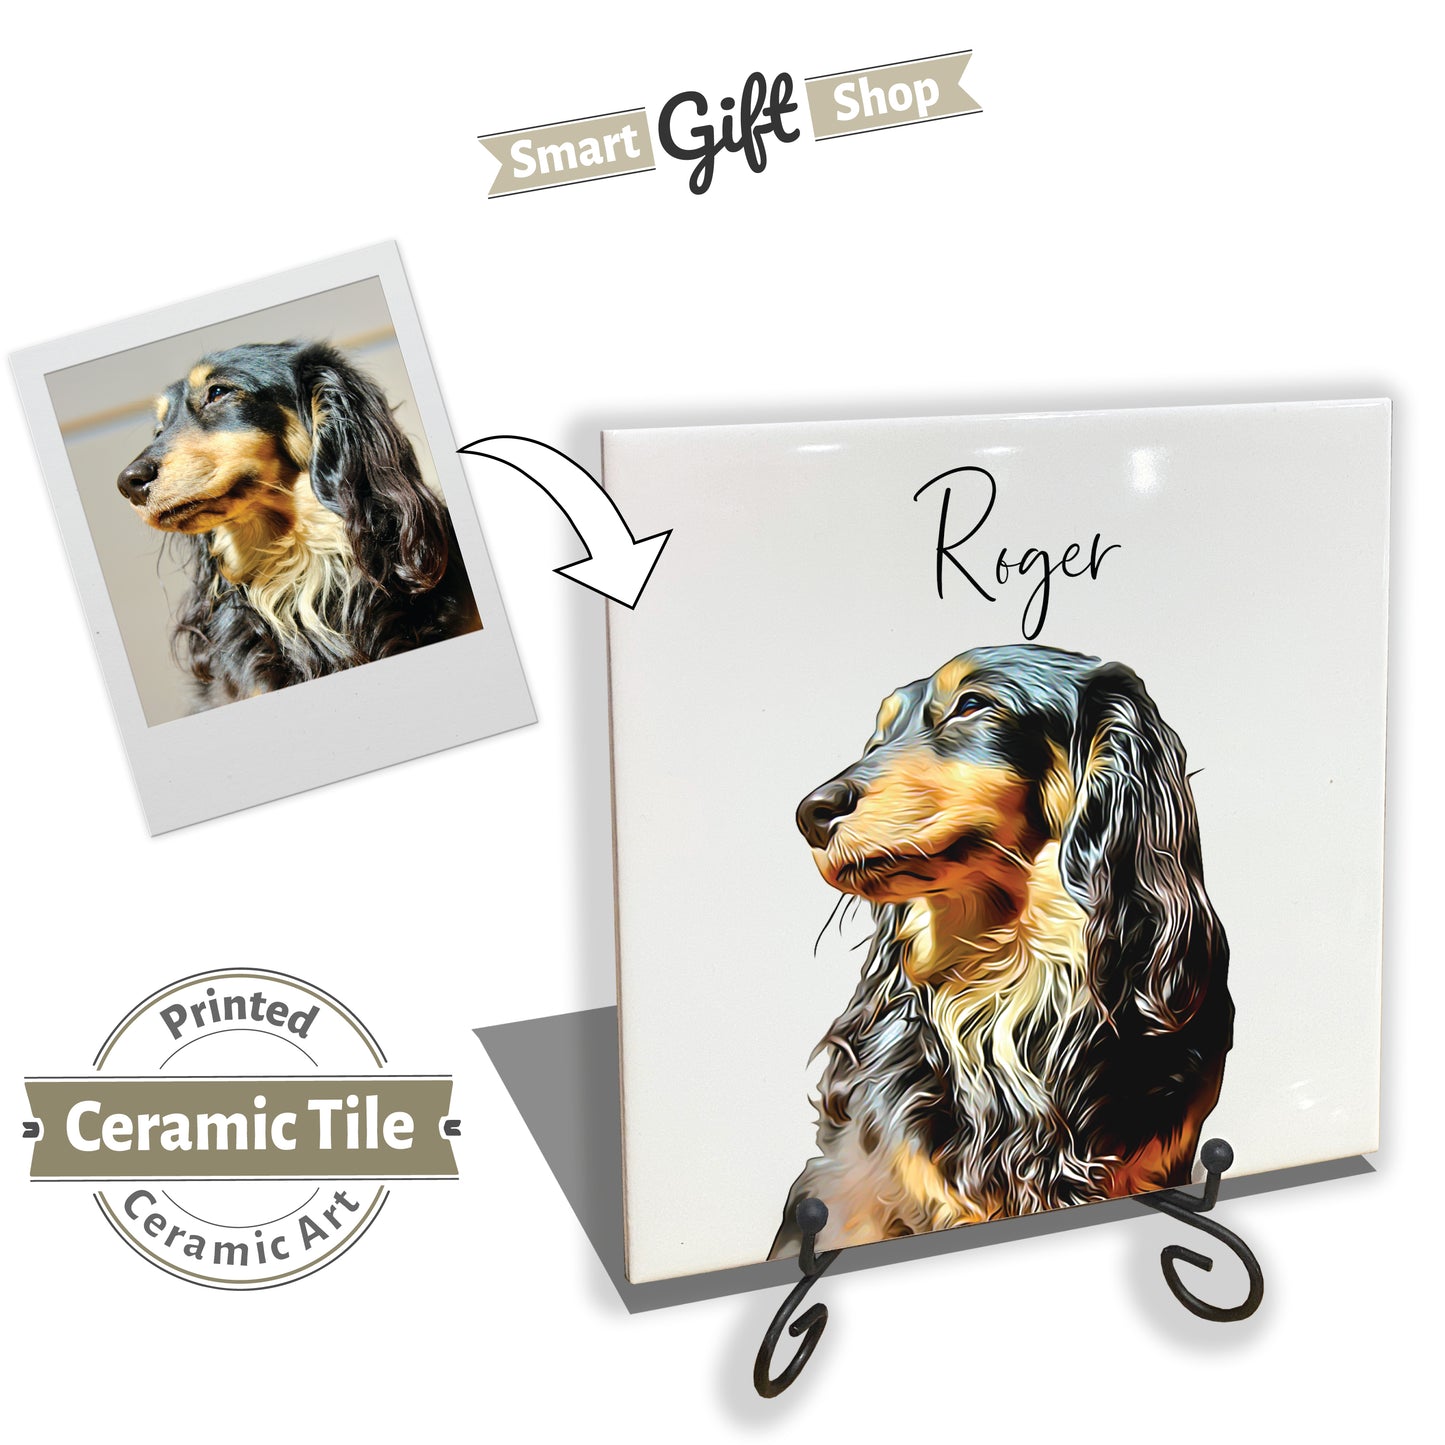 Personalised Pet Portrait on Tile with Stand - Brush Custom Photo Print Dog Cat